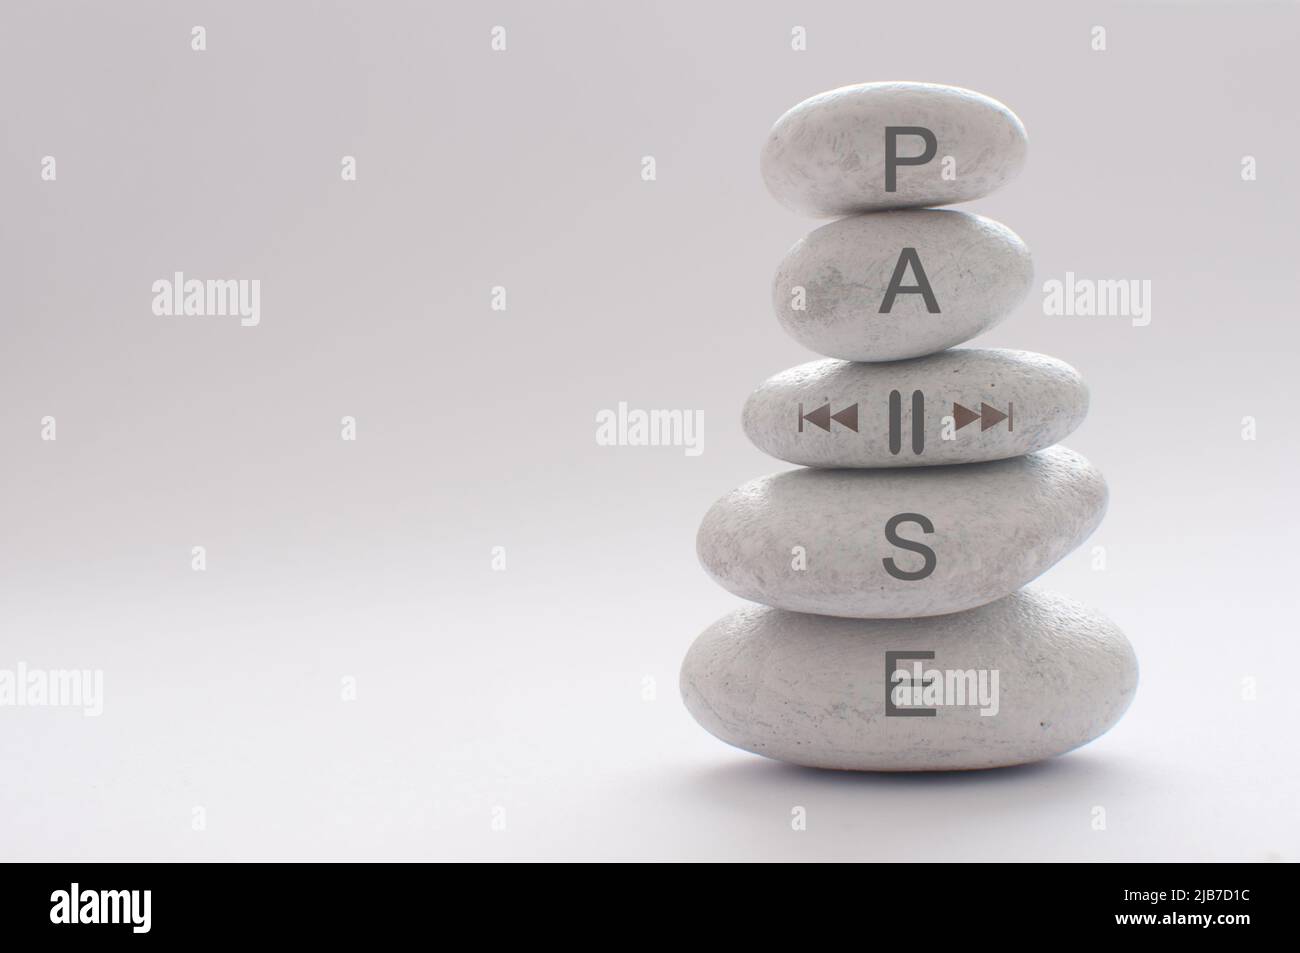 Yoga zen stones balancing on top of each other with pause symbol Stock Photo